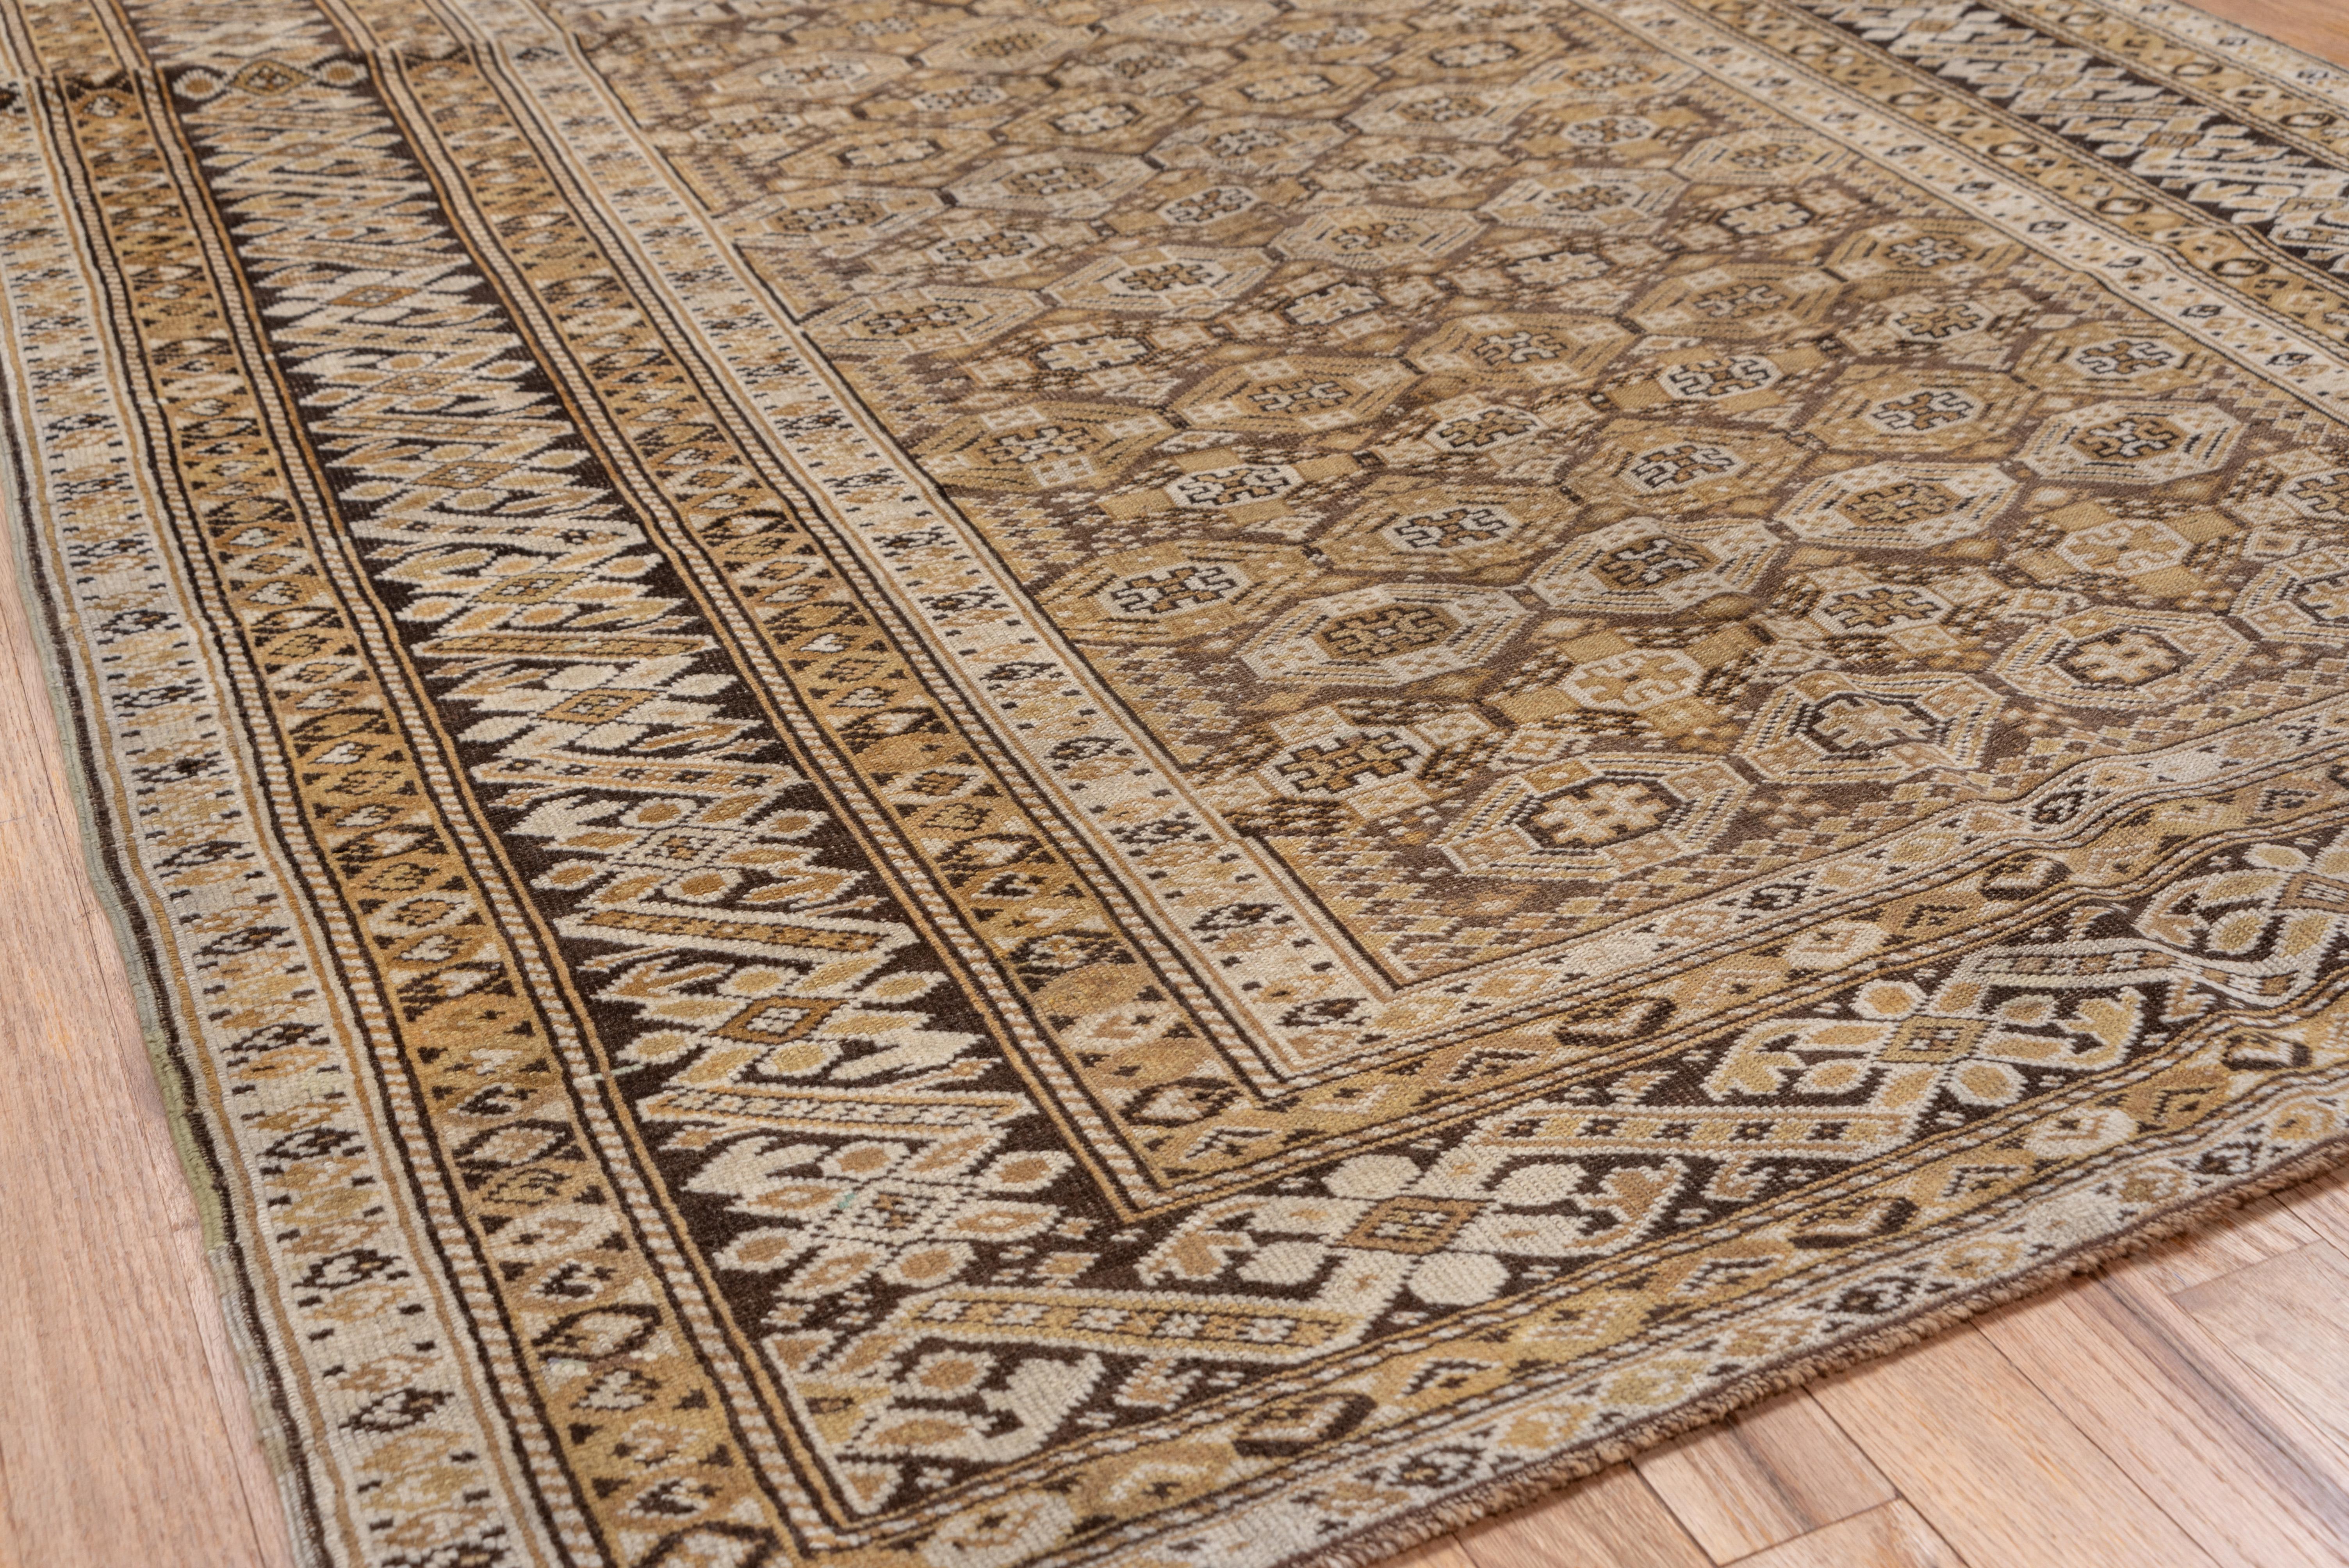 This east Caspian long rug show a characteristic rosette and diagonal bar Chi-Chi border on dark brown, with a brown field with additional Chi-Chi octagons, interrupted by a panel of 